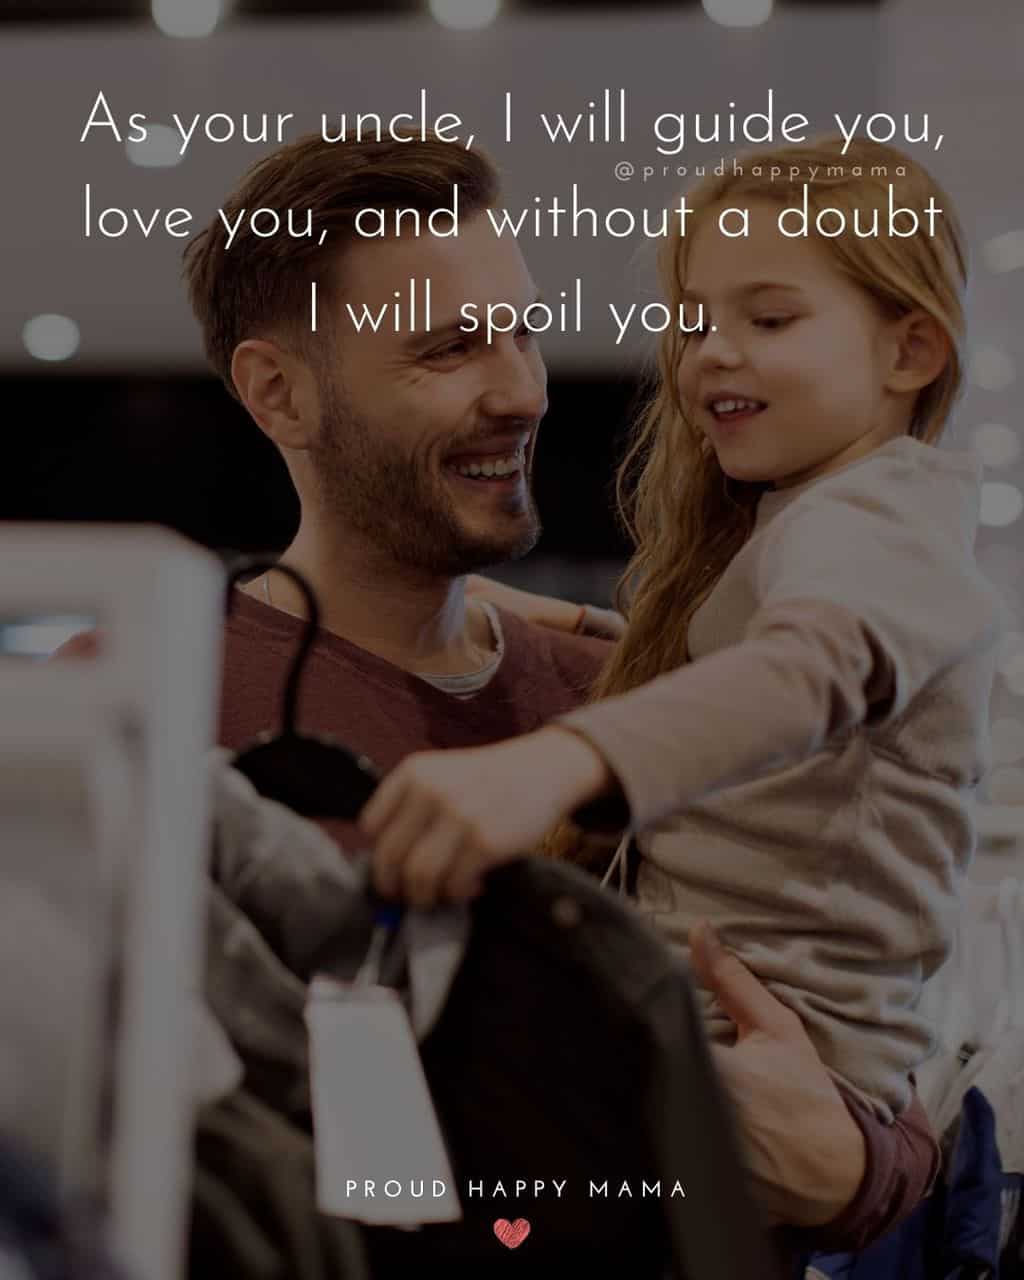 Niece Quotes - As your uncle, I will guide you, love you, and without a doubt I will spoil you.